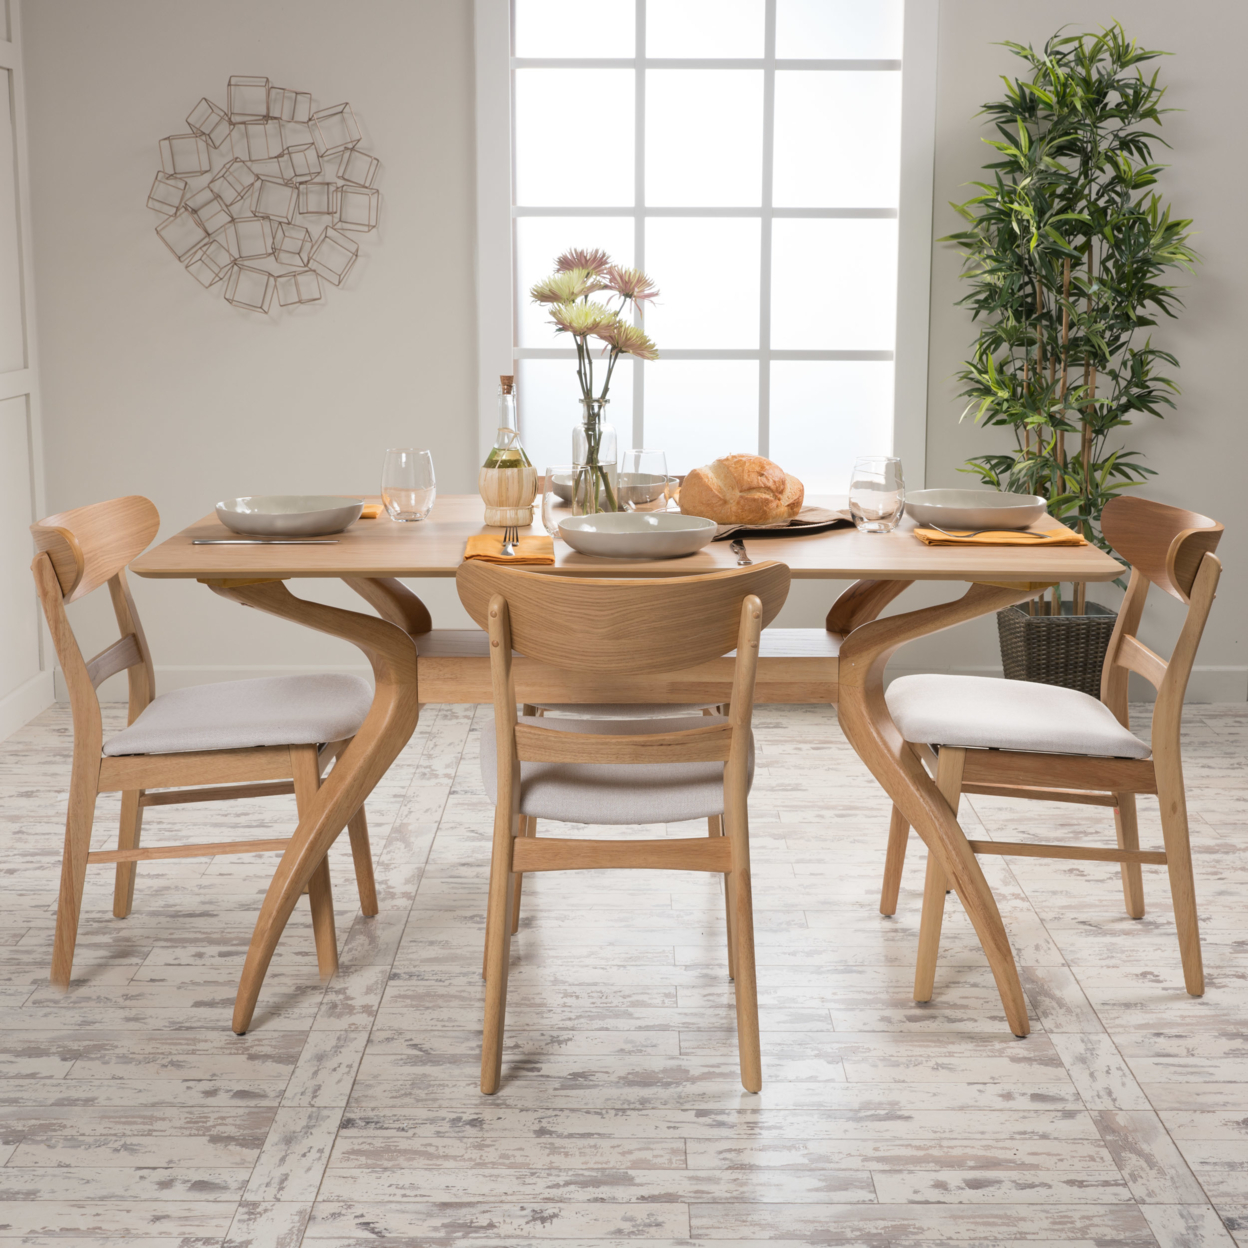 Isador Mid-Century Modern 5 Piece Dining Set With Curved Leg Rectangular Table - Light Beige